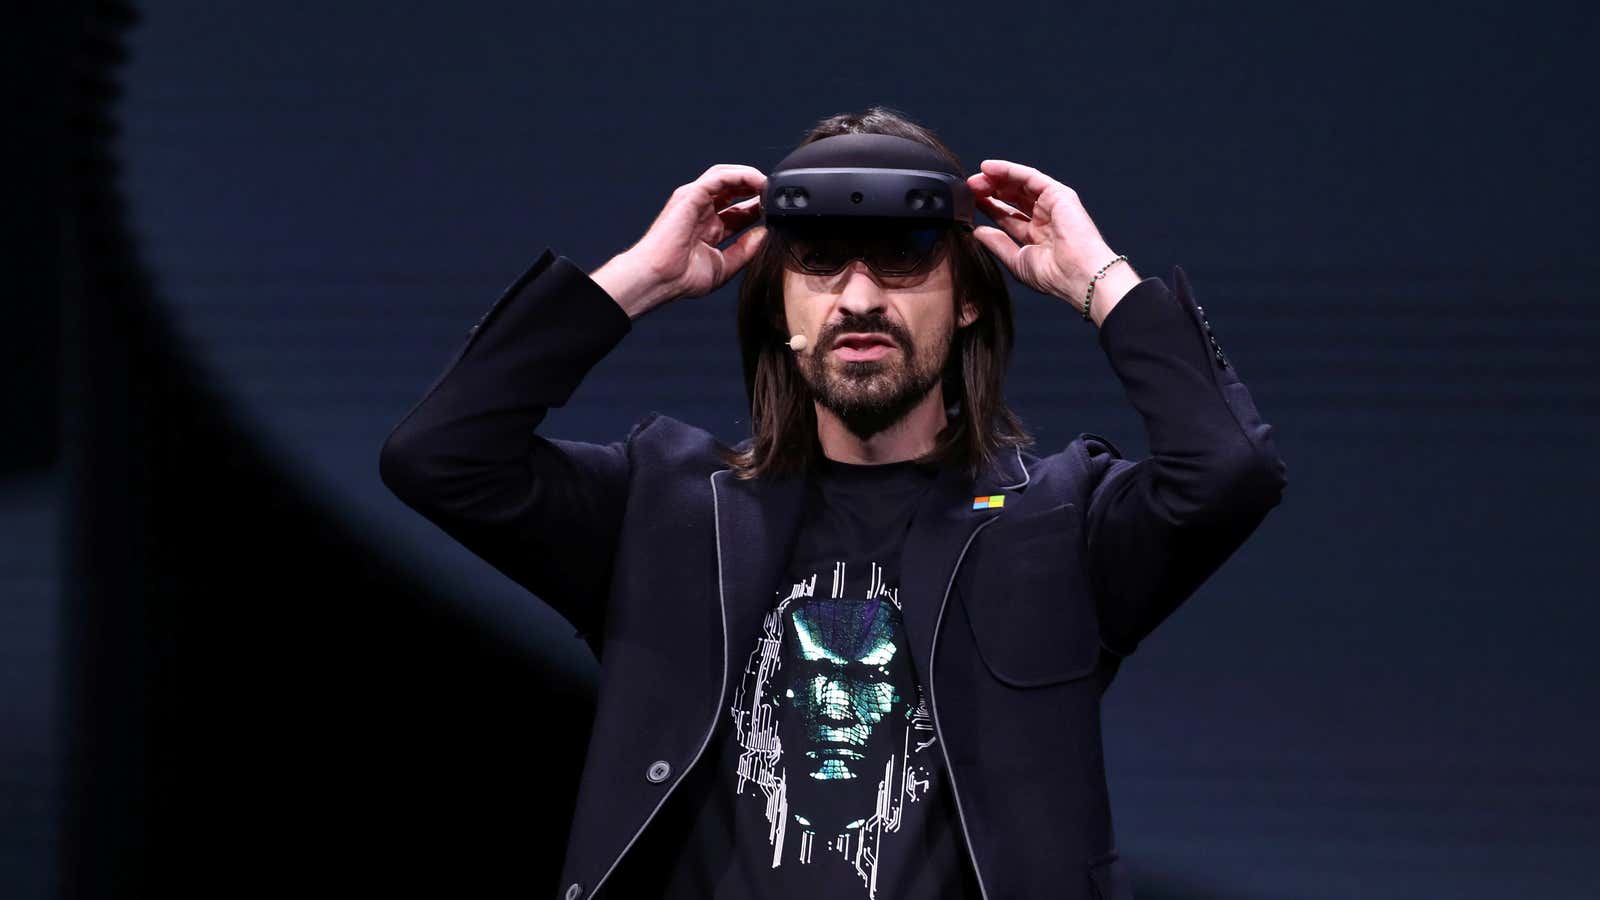 Microsoft’s HoloLens inventor Alex Kipman showing off the latest version of the device.